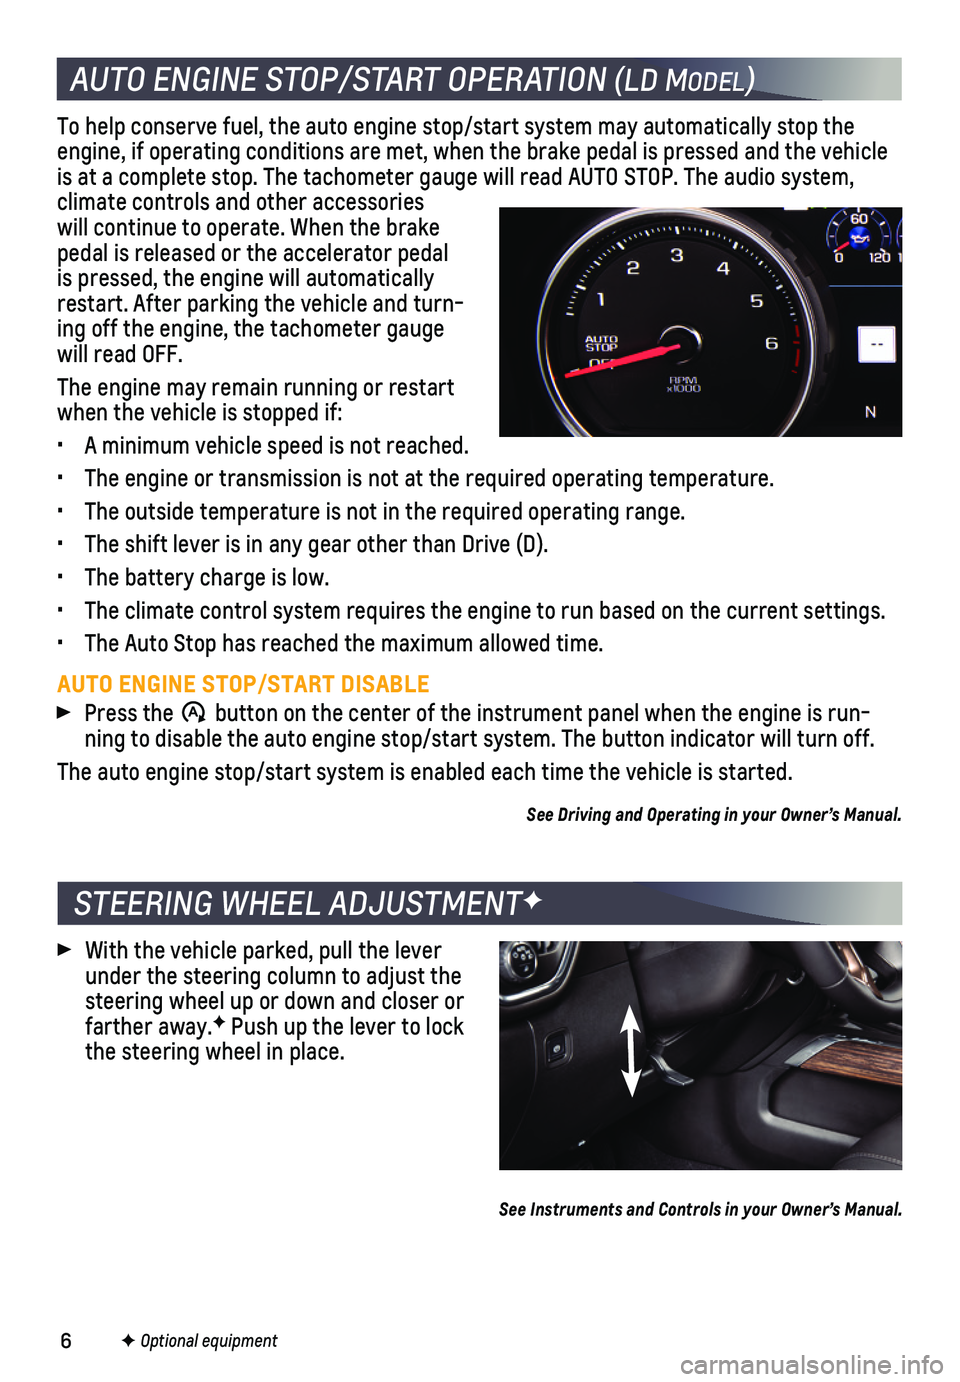 CHEVROLET SILVERADO 2020  Get To Know Guide 6F Optional equipment      
STEERING WHEEL ADJUSTMENTF
 With the vehicle parked, pull the lever under the steering column to adjust the steering wheel up or down and closer or farther away.F Push up t